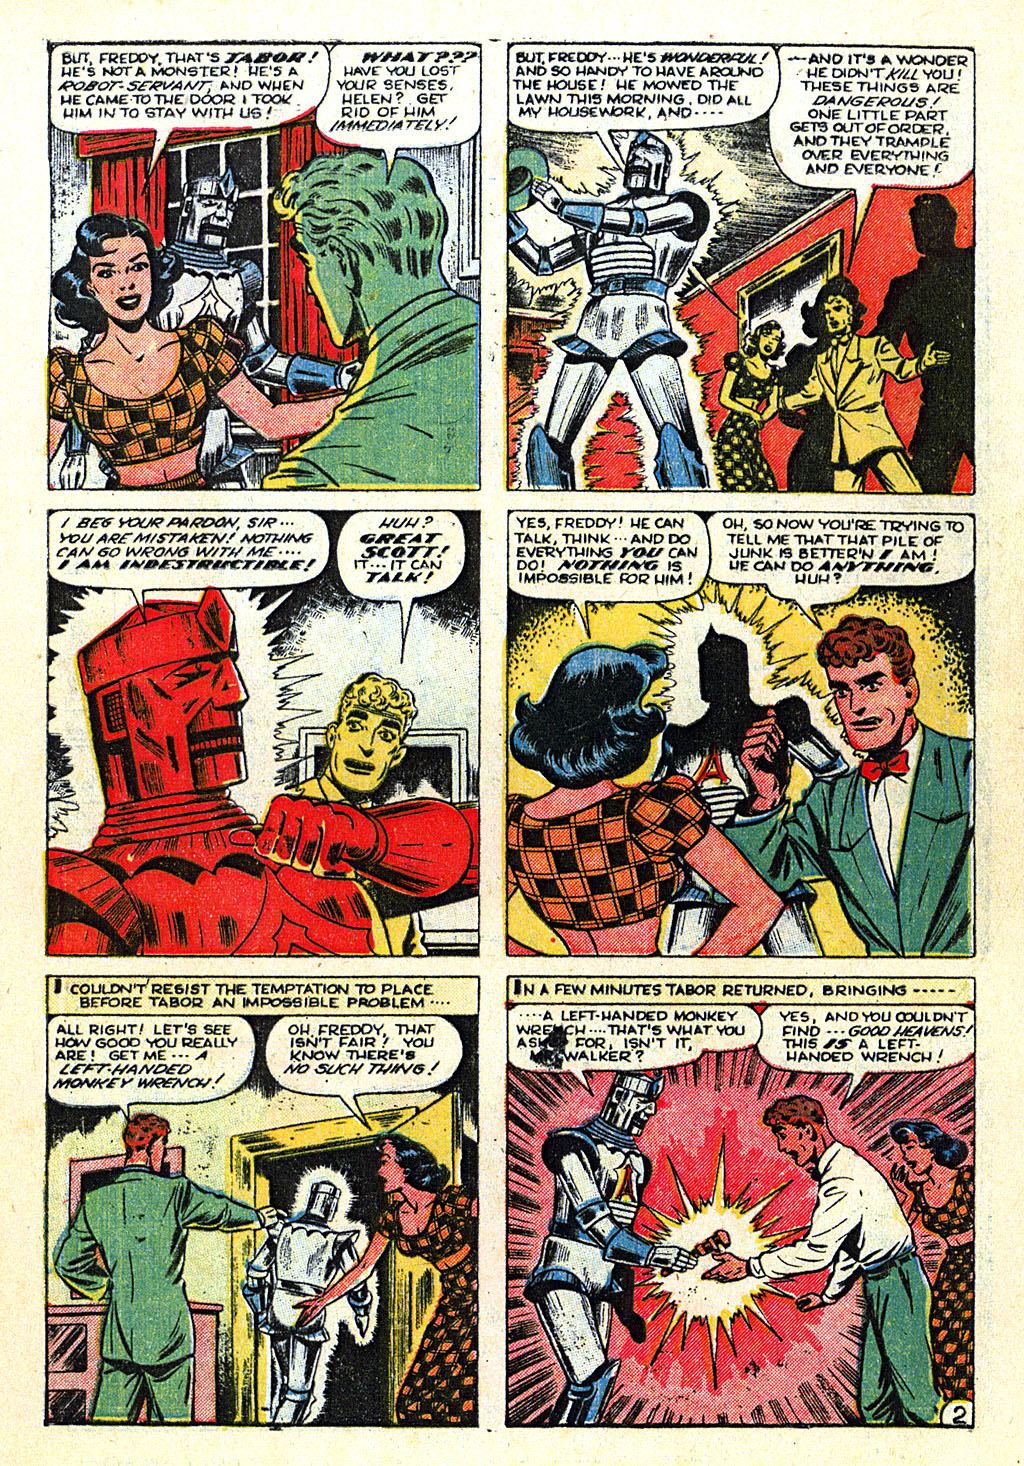 Marvel Tales (1949) 104 Page 3